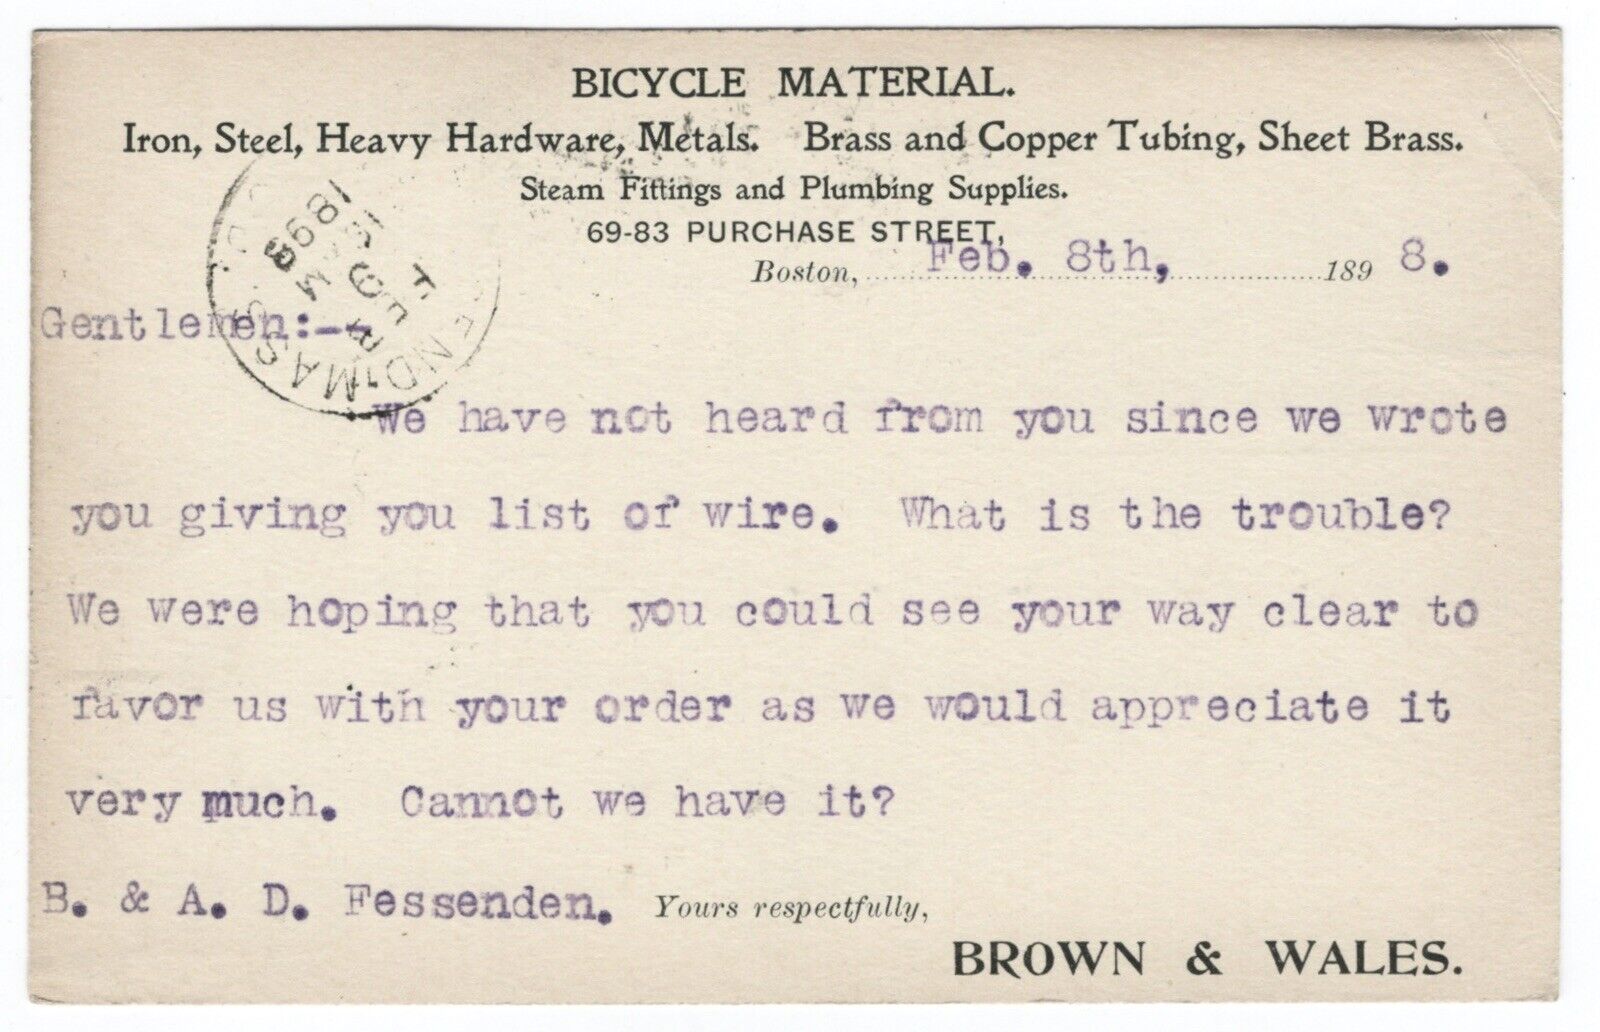 1898 POSTCARD TRADE CARD BROWN & WALES BICYCLE MATERIAL HARDWARE STEAM FITTINGS